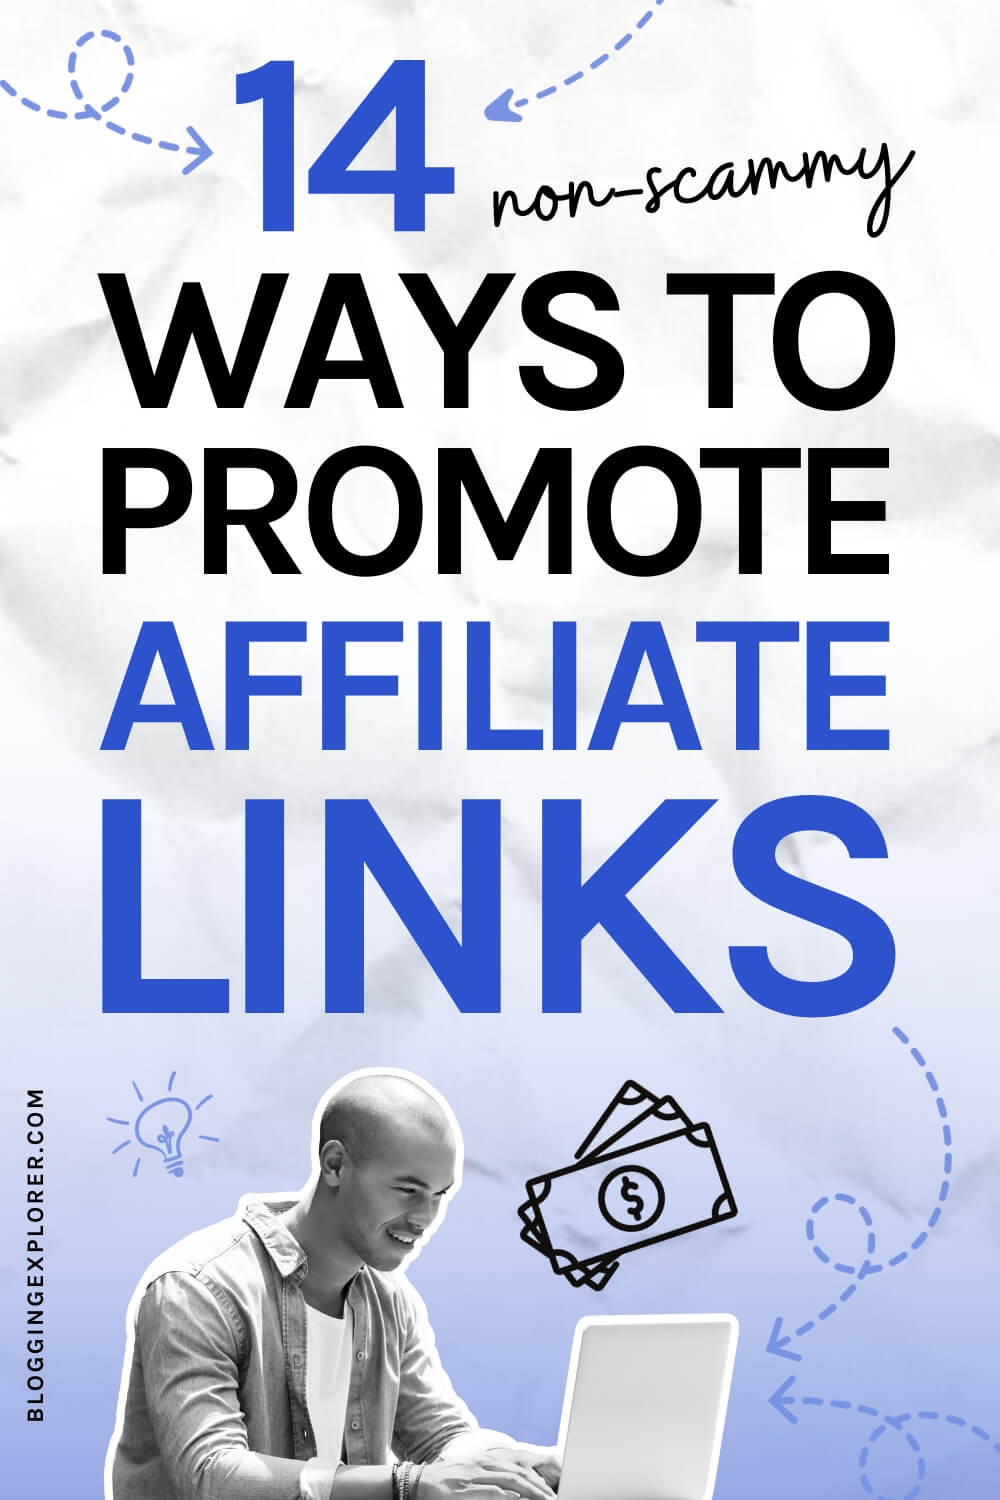 Best ways to promote affiliate links – Affiliate marketing guide for bloggers to make money online